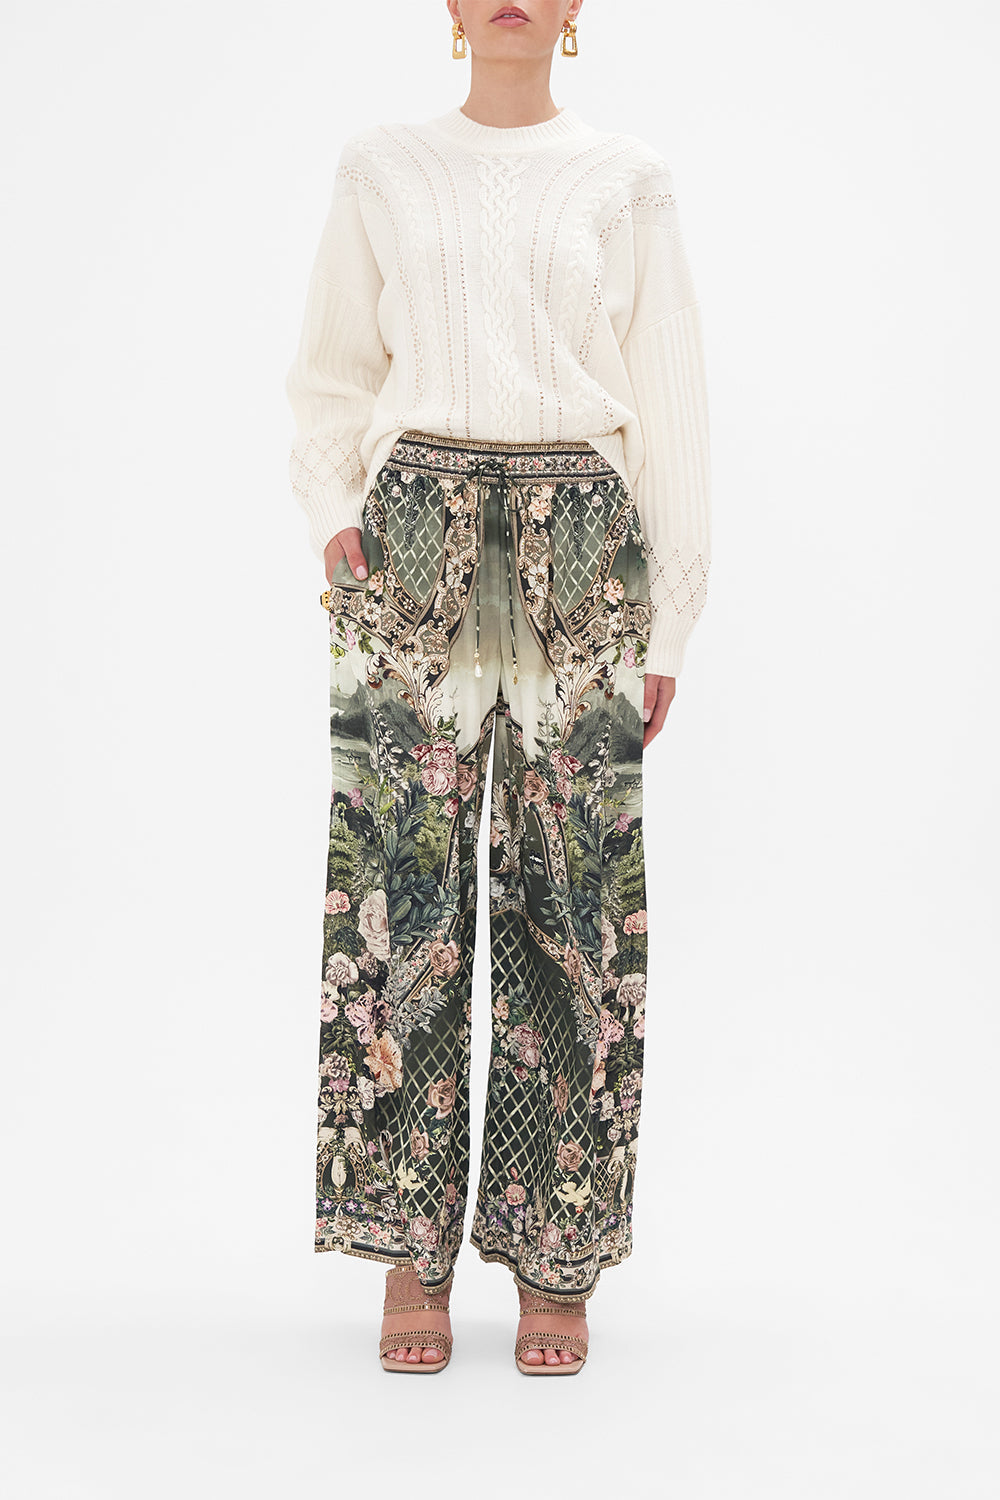 Front view of model wearing CAMILLA green floral silk pants in Garden Of Good Fortune print